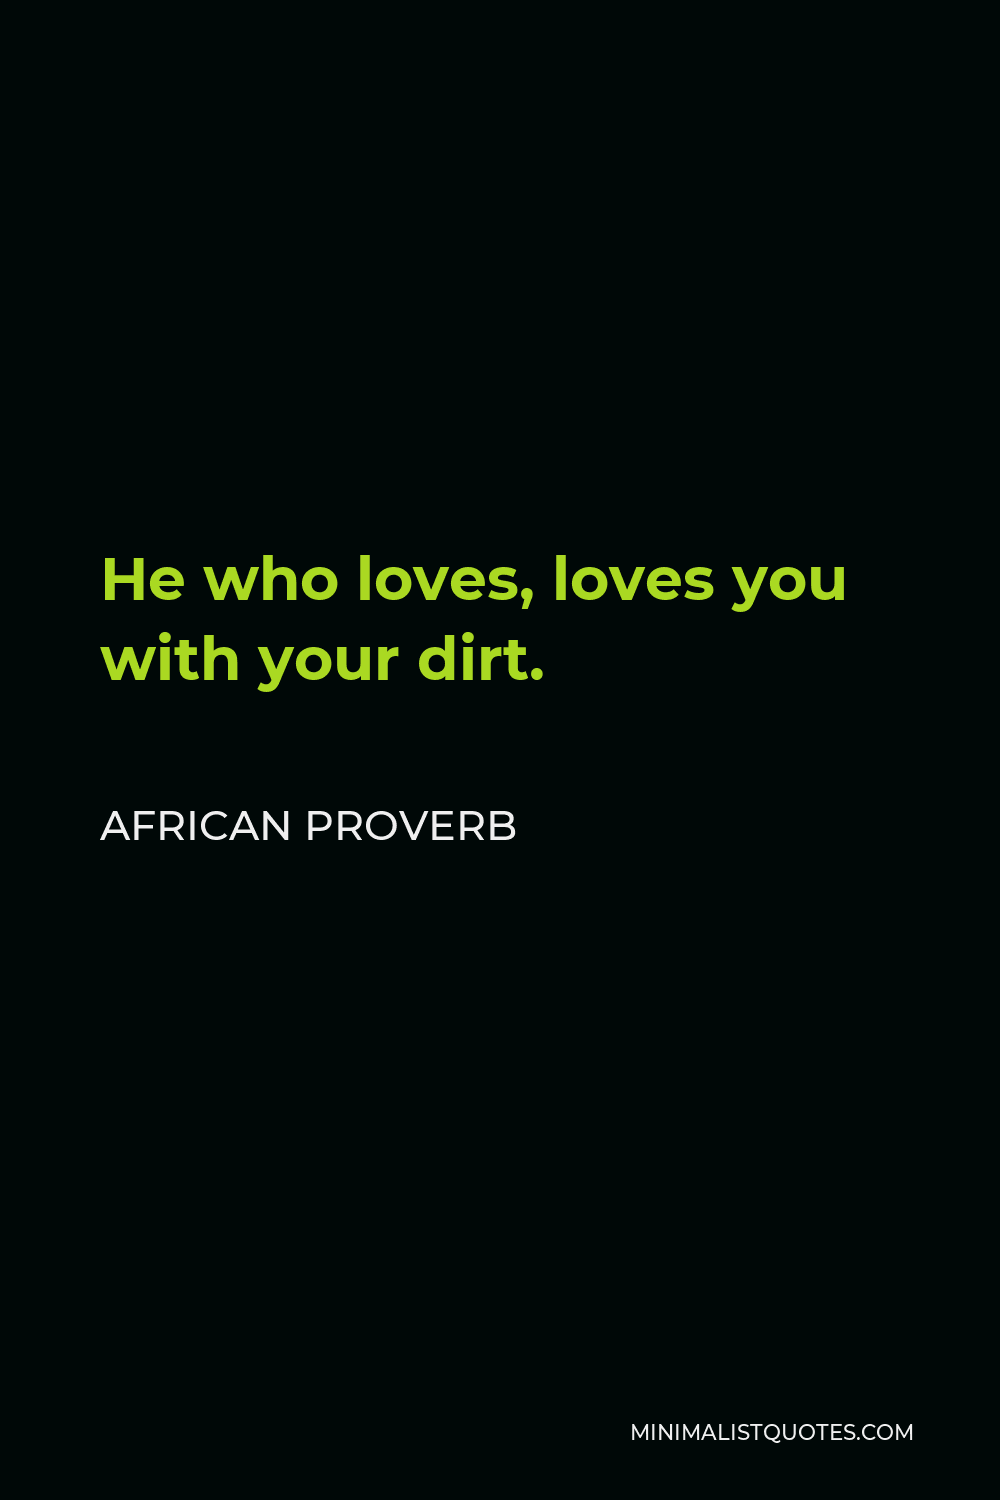 African Proverb Quote - He who loves, loves you with your dirt.